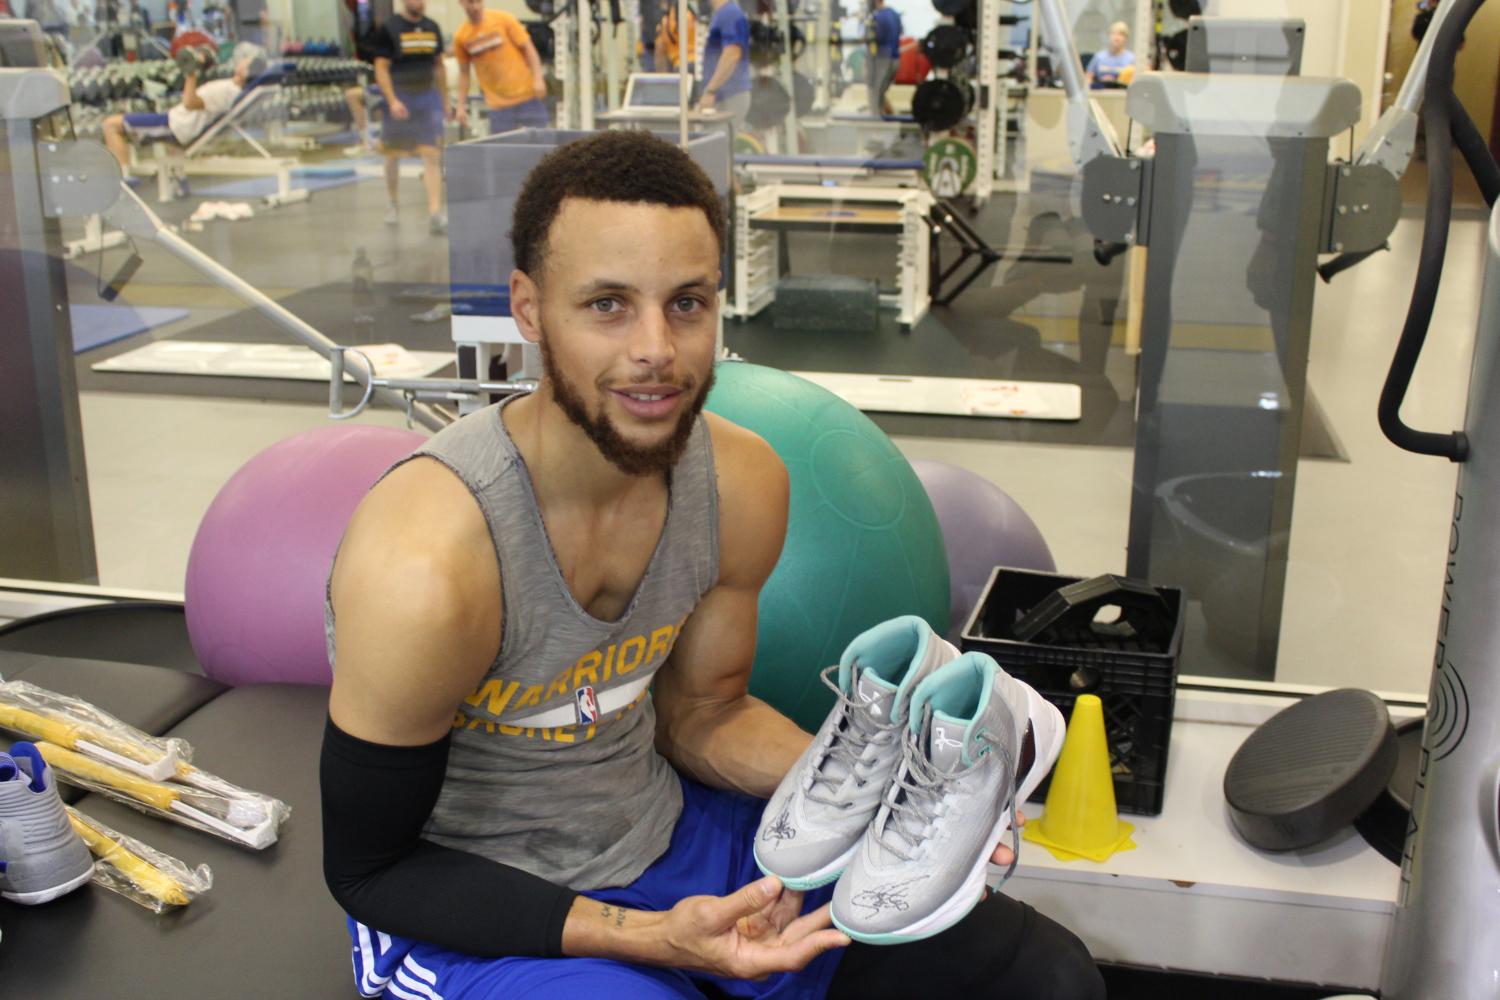 Photo+by+Rachel+Hildebrand.+Curry+with+Nuestro%E2%80%99s+signed+shoes+after+practice+today